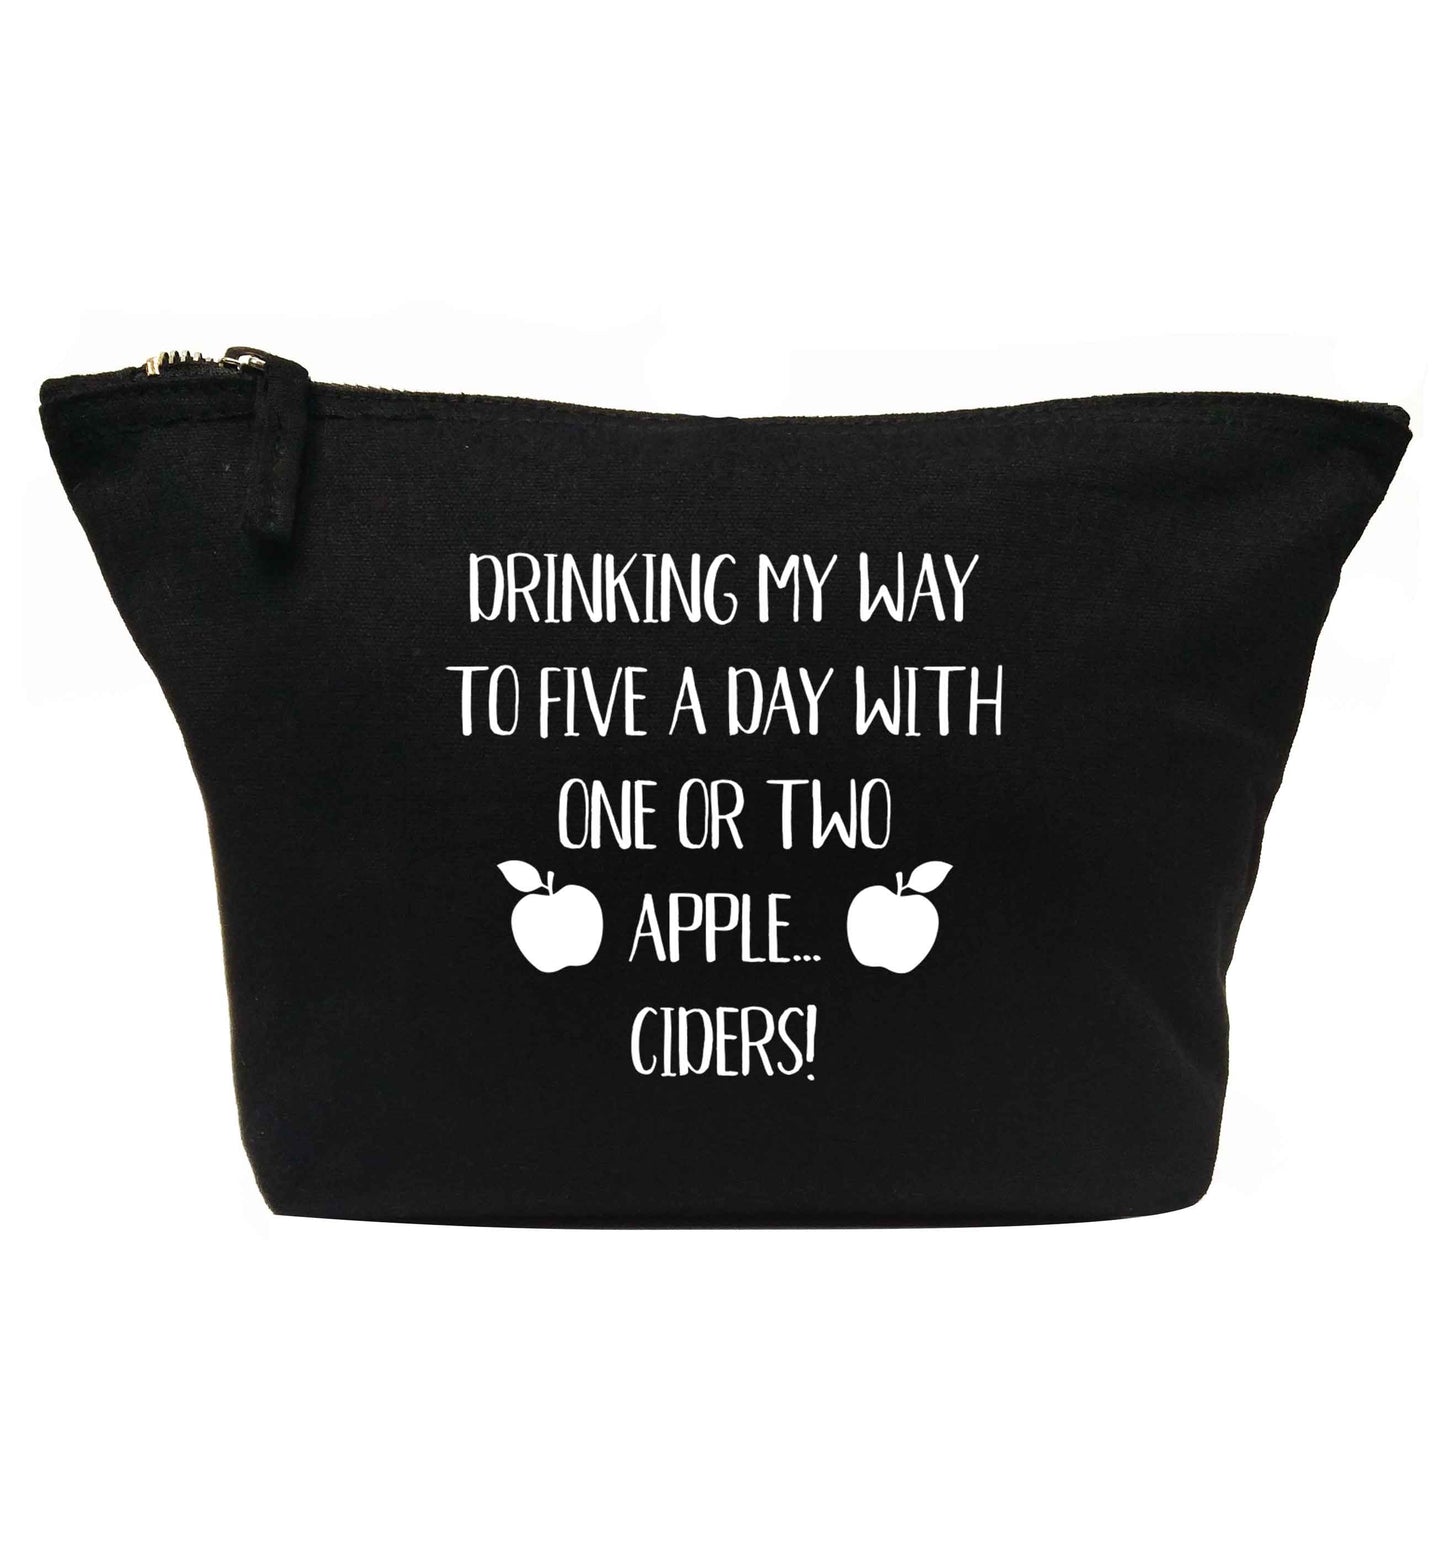 Drinking my way to five a day with one or two apple ciders | makeup / wash bag